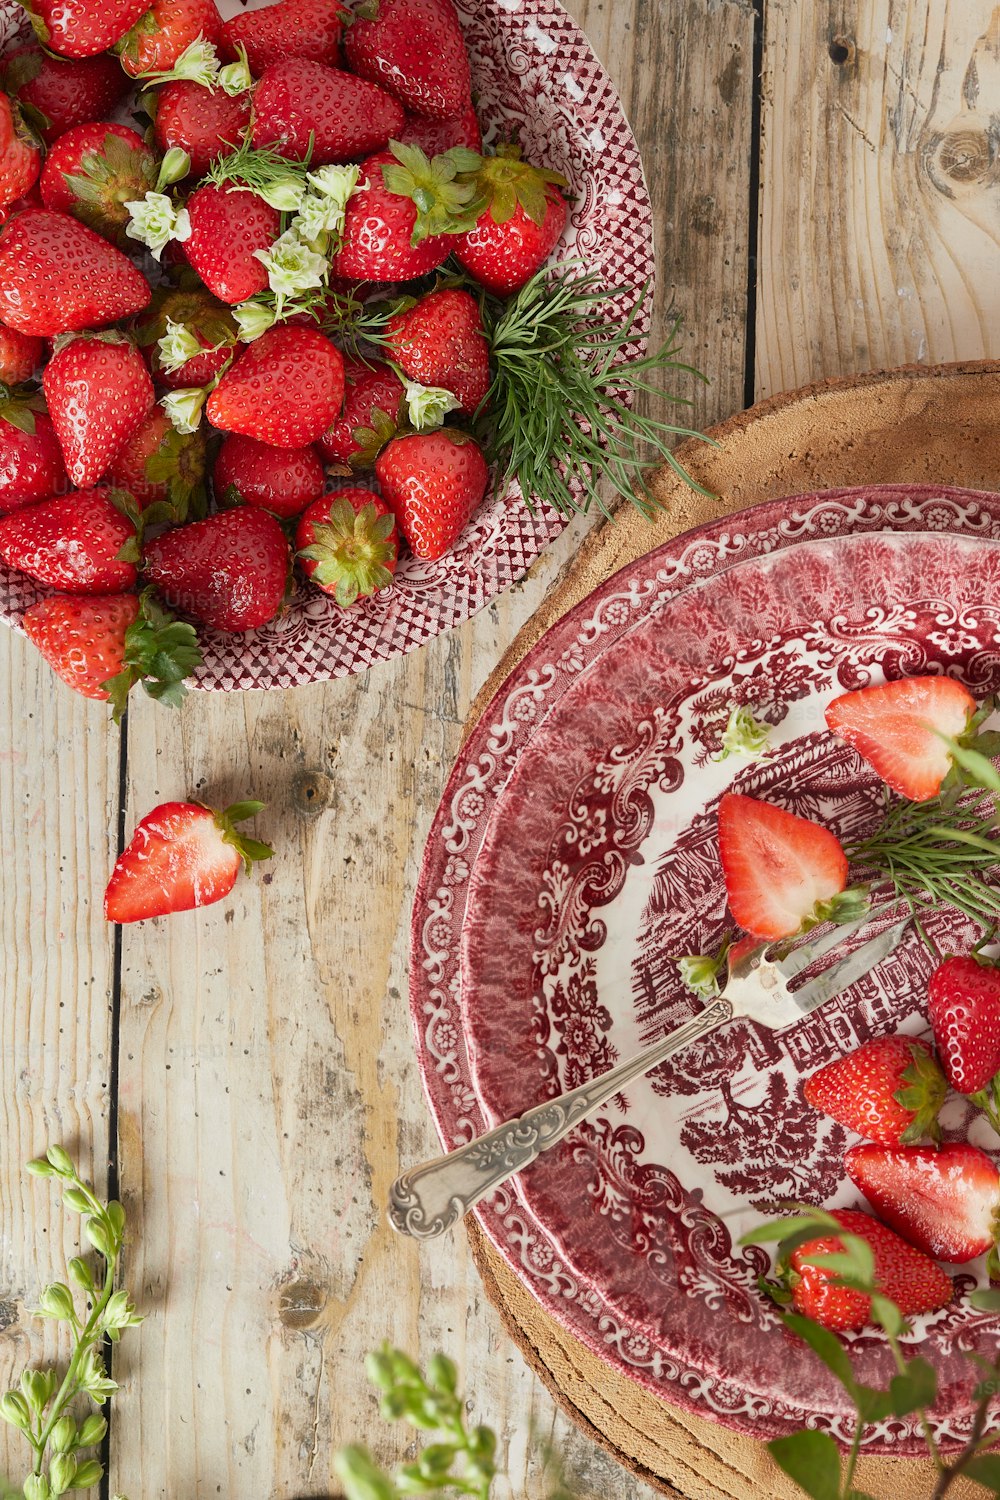 a bowl of strawberries and a plate of strawberries